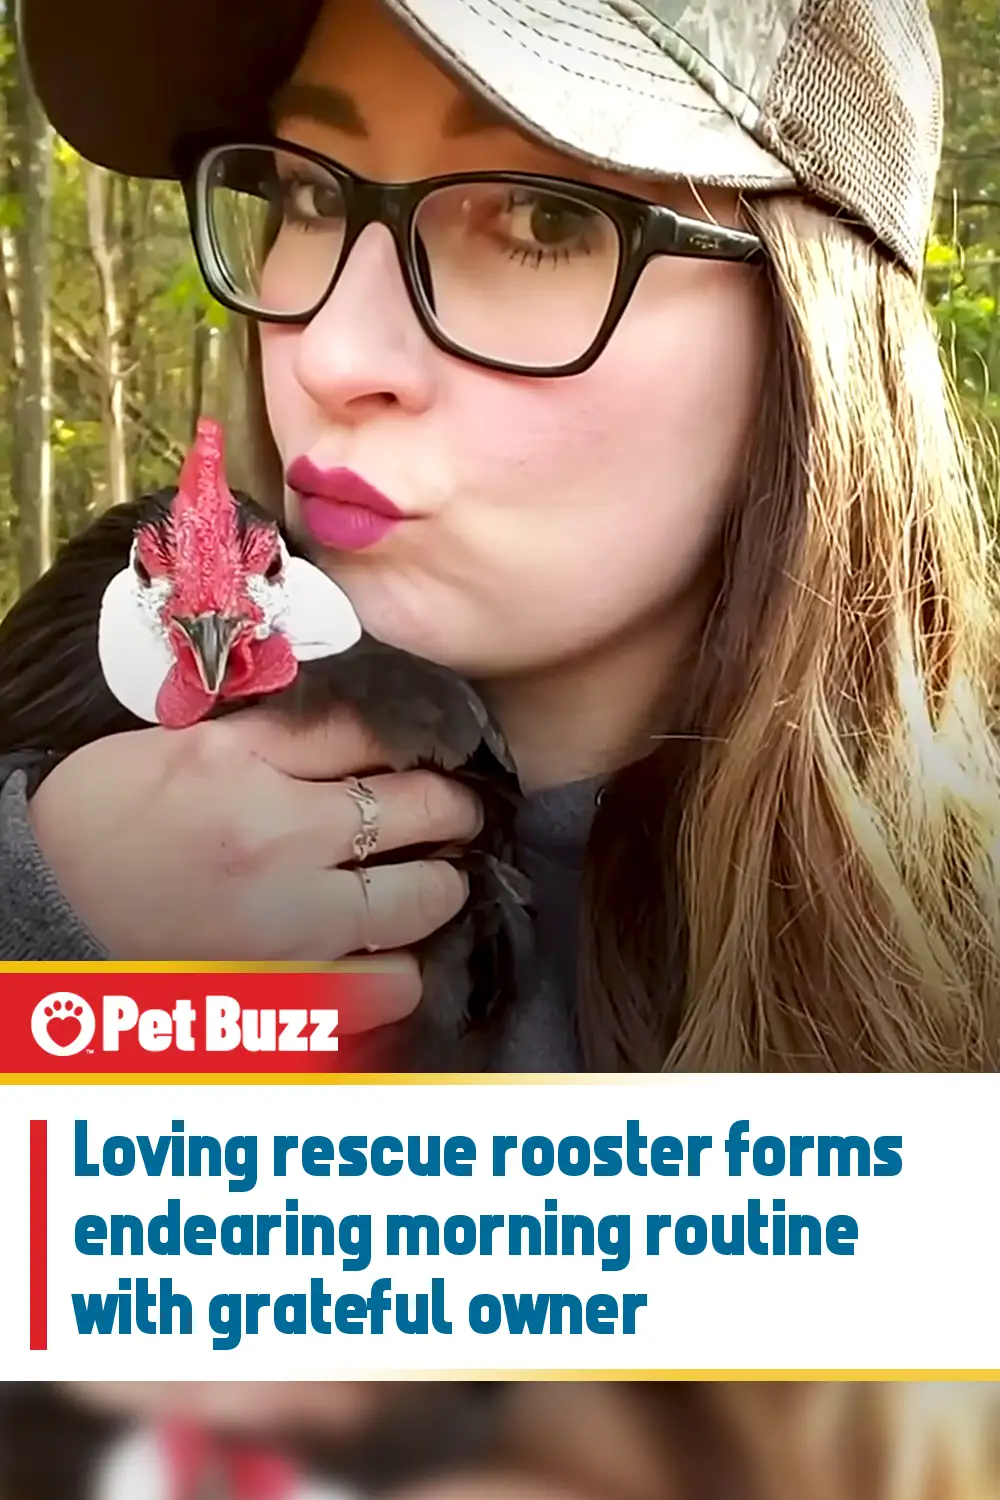 Loving rescue rooster forms endearing morning routine with grateful owner